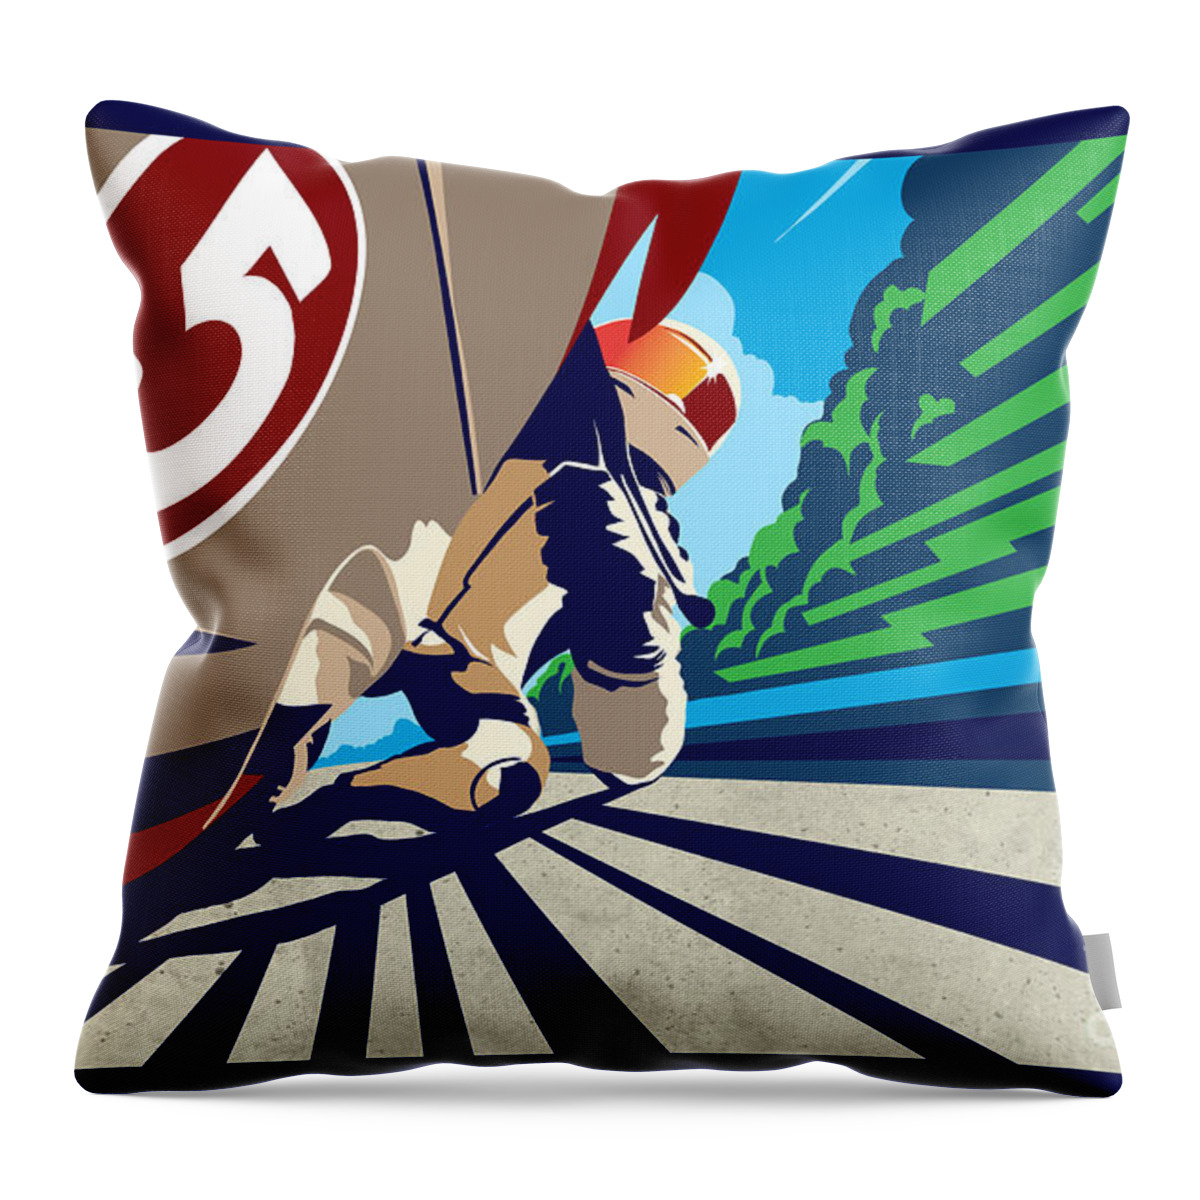 Motorcycle Throw Pillow featuring the painting Full Throttle by Sassan Filsoof